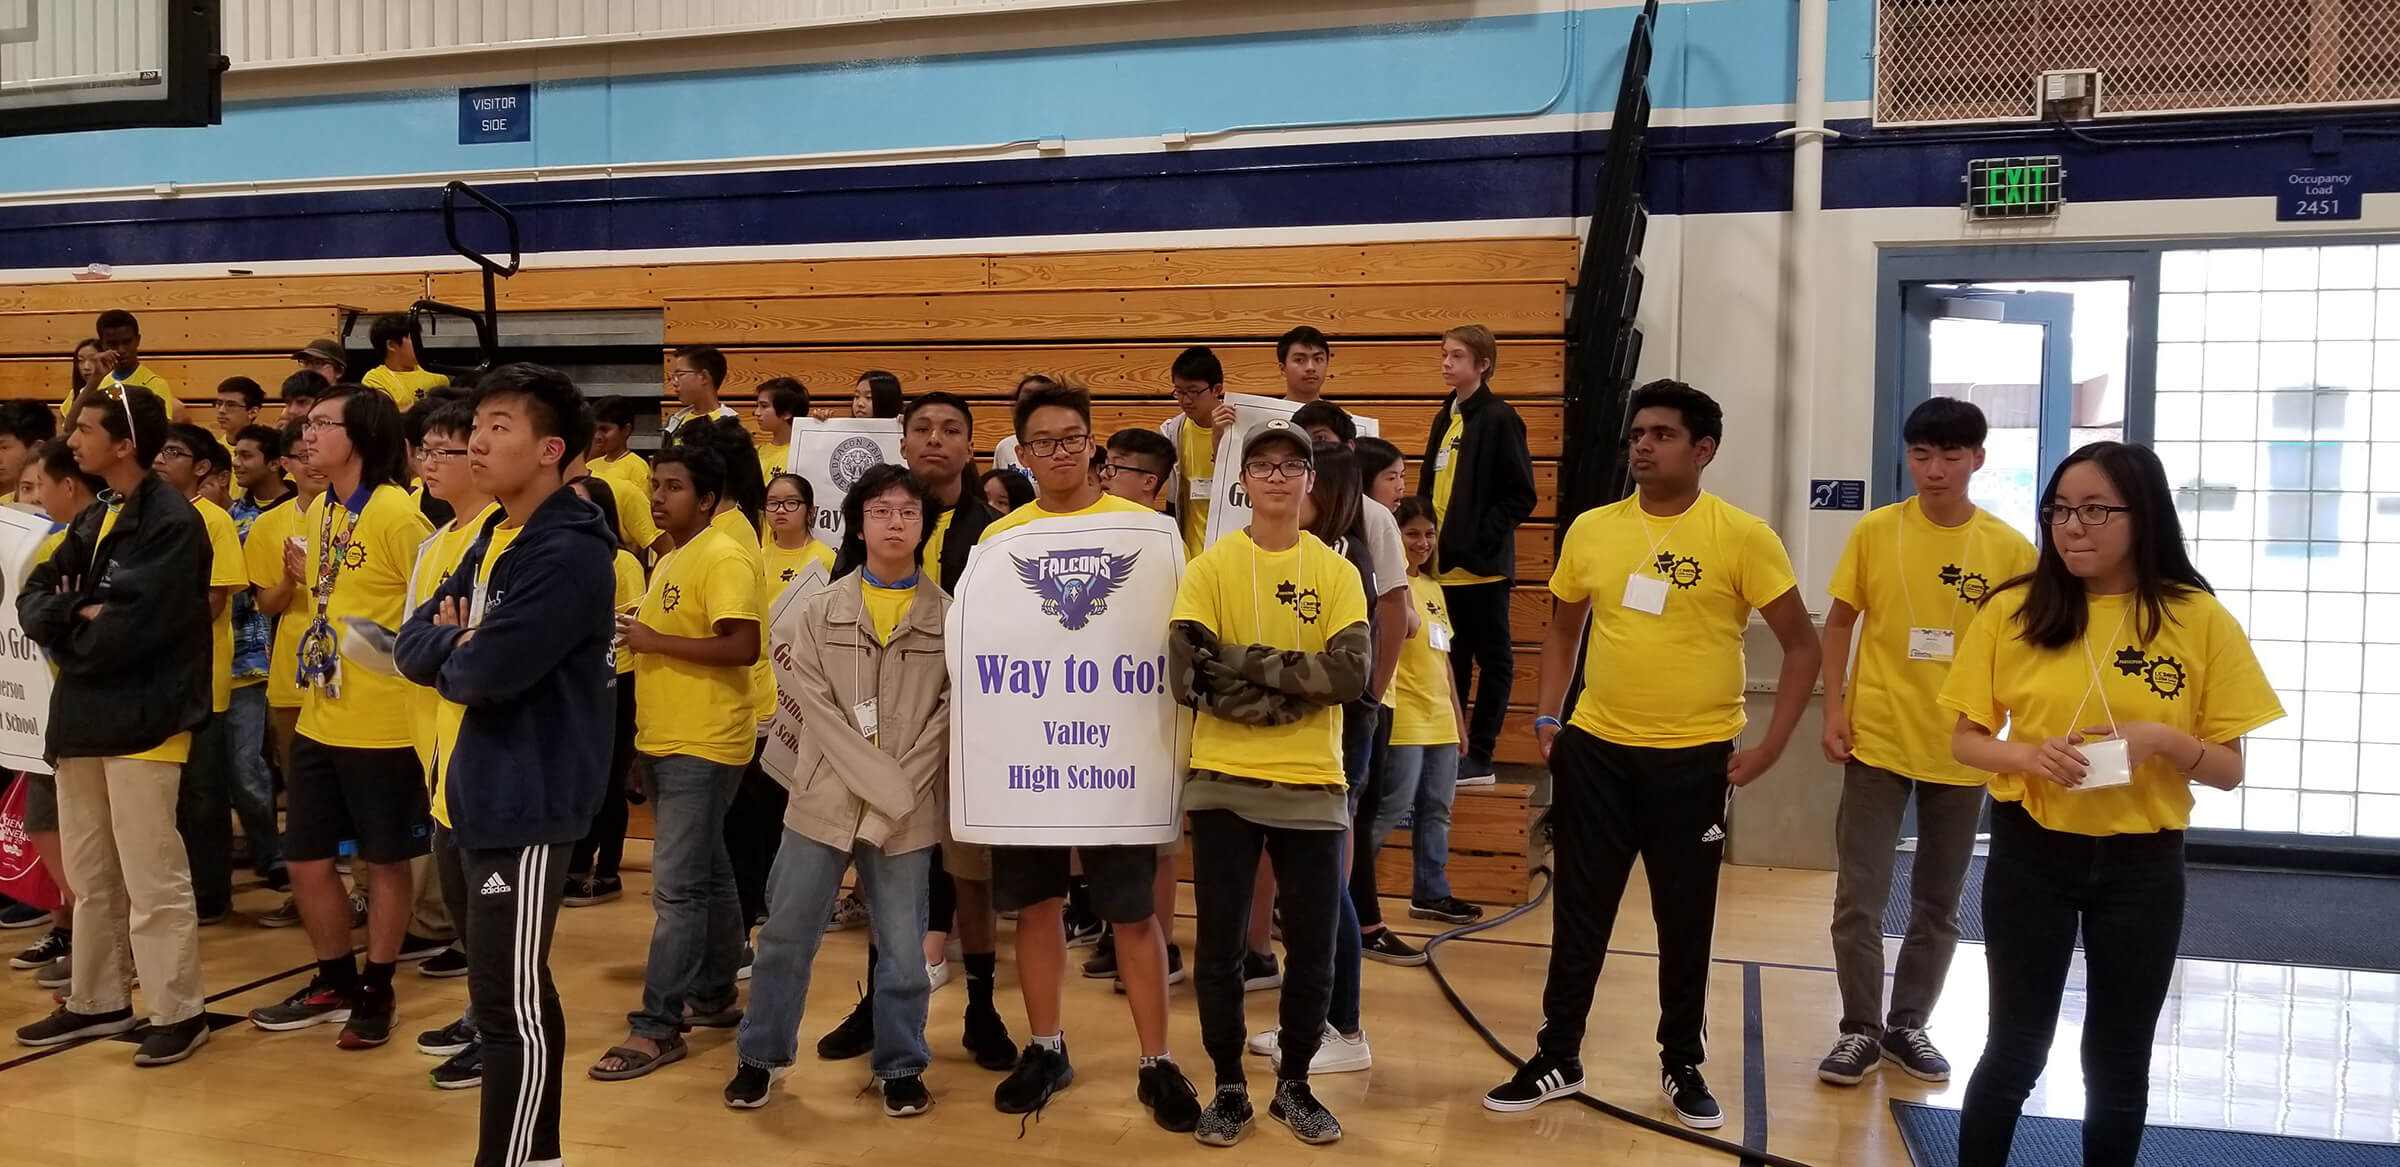 Engineering and computer science students gather in the gymnasium to cheer on the Valley High School Falcons.